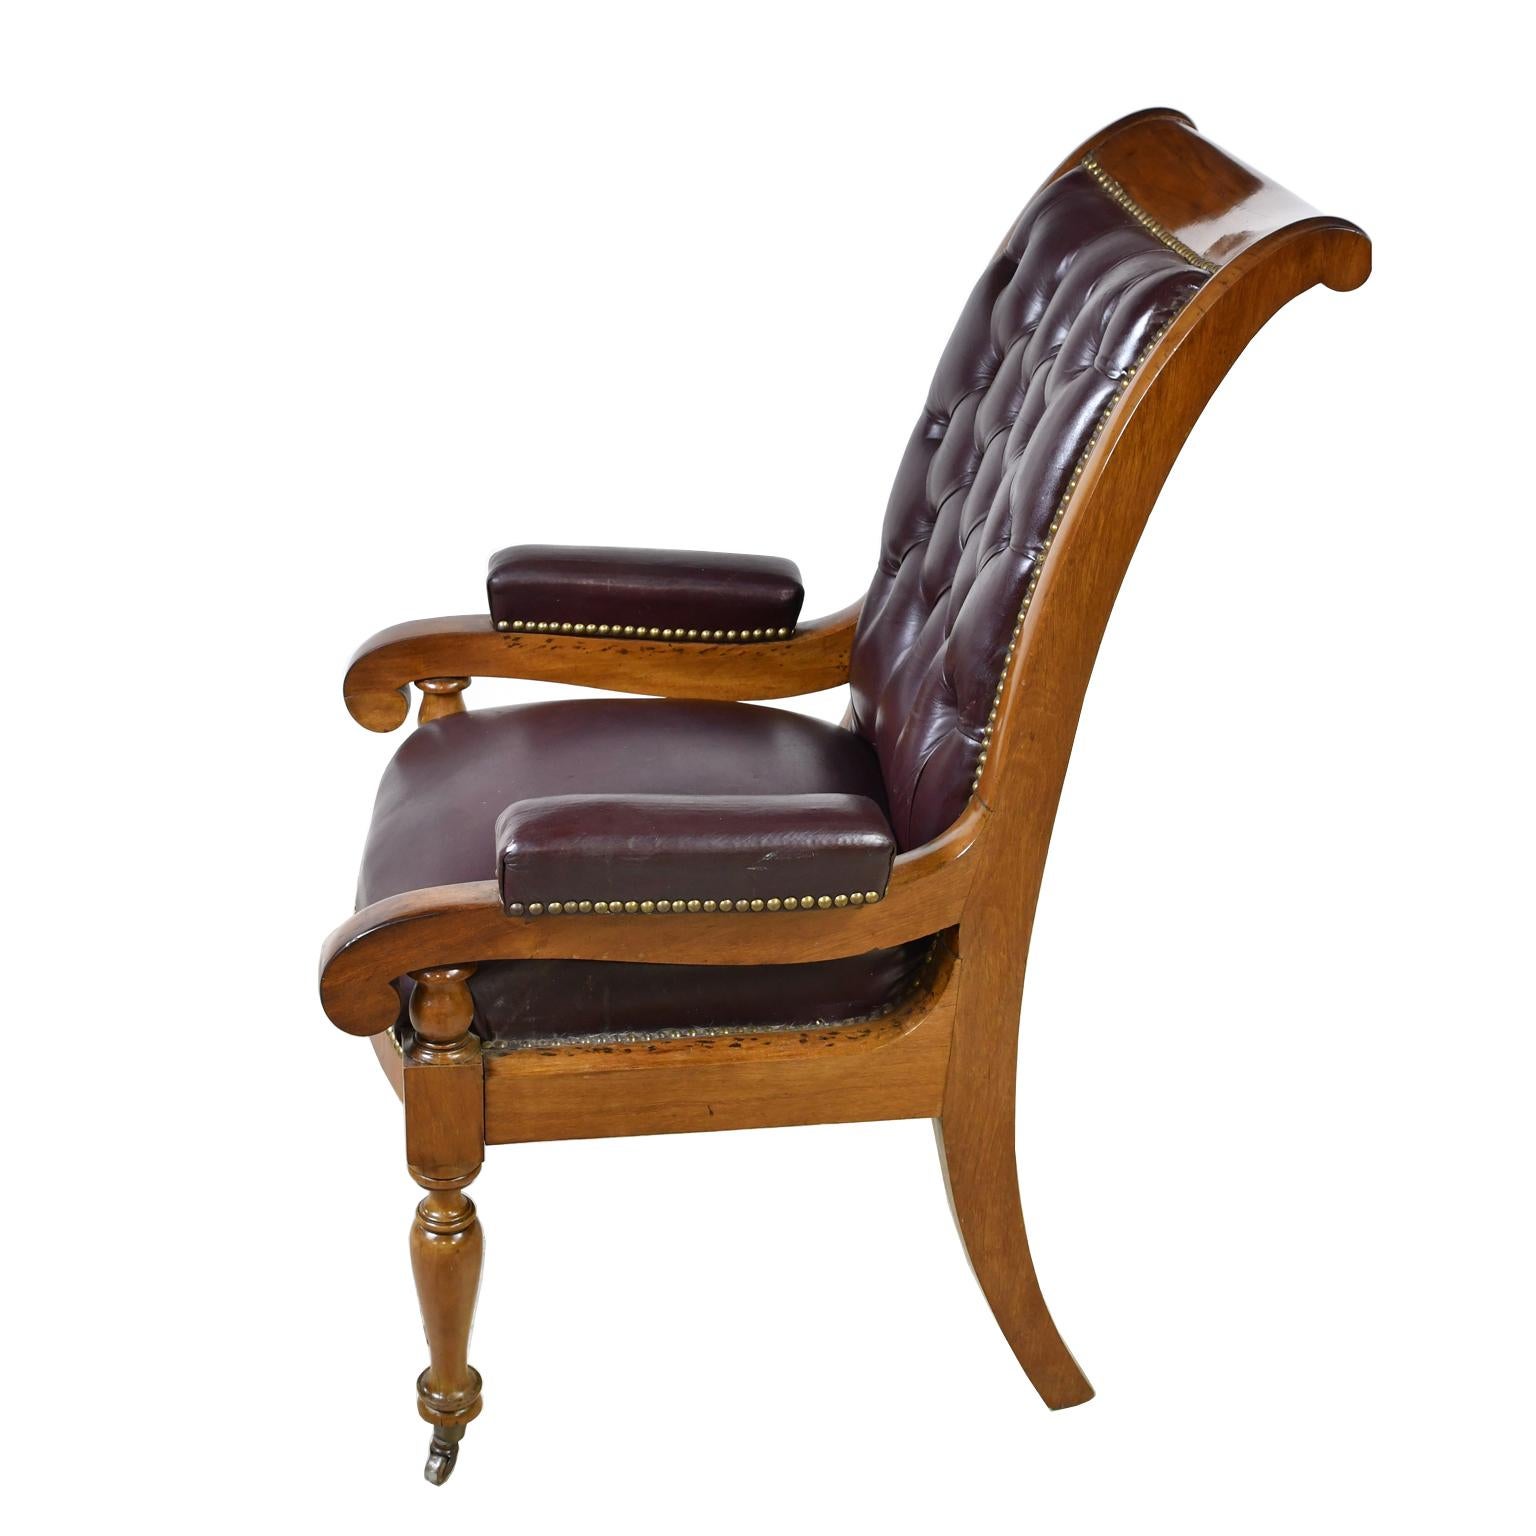 Polished French Charles X Desk Chair with Mahogany Frame and Tufted Leather, circa 1820